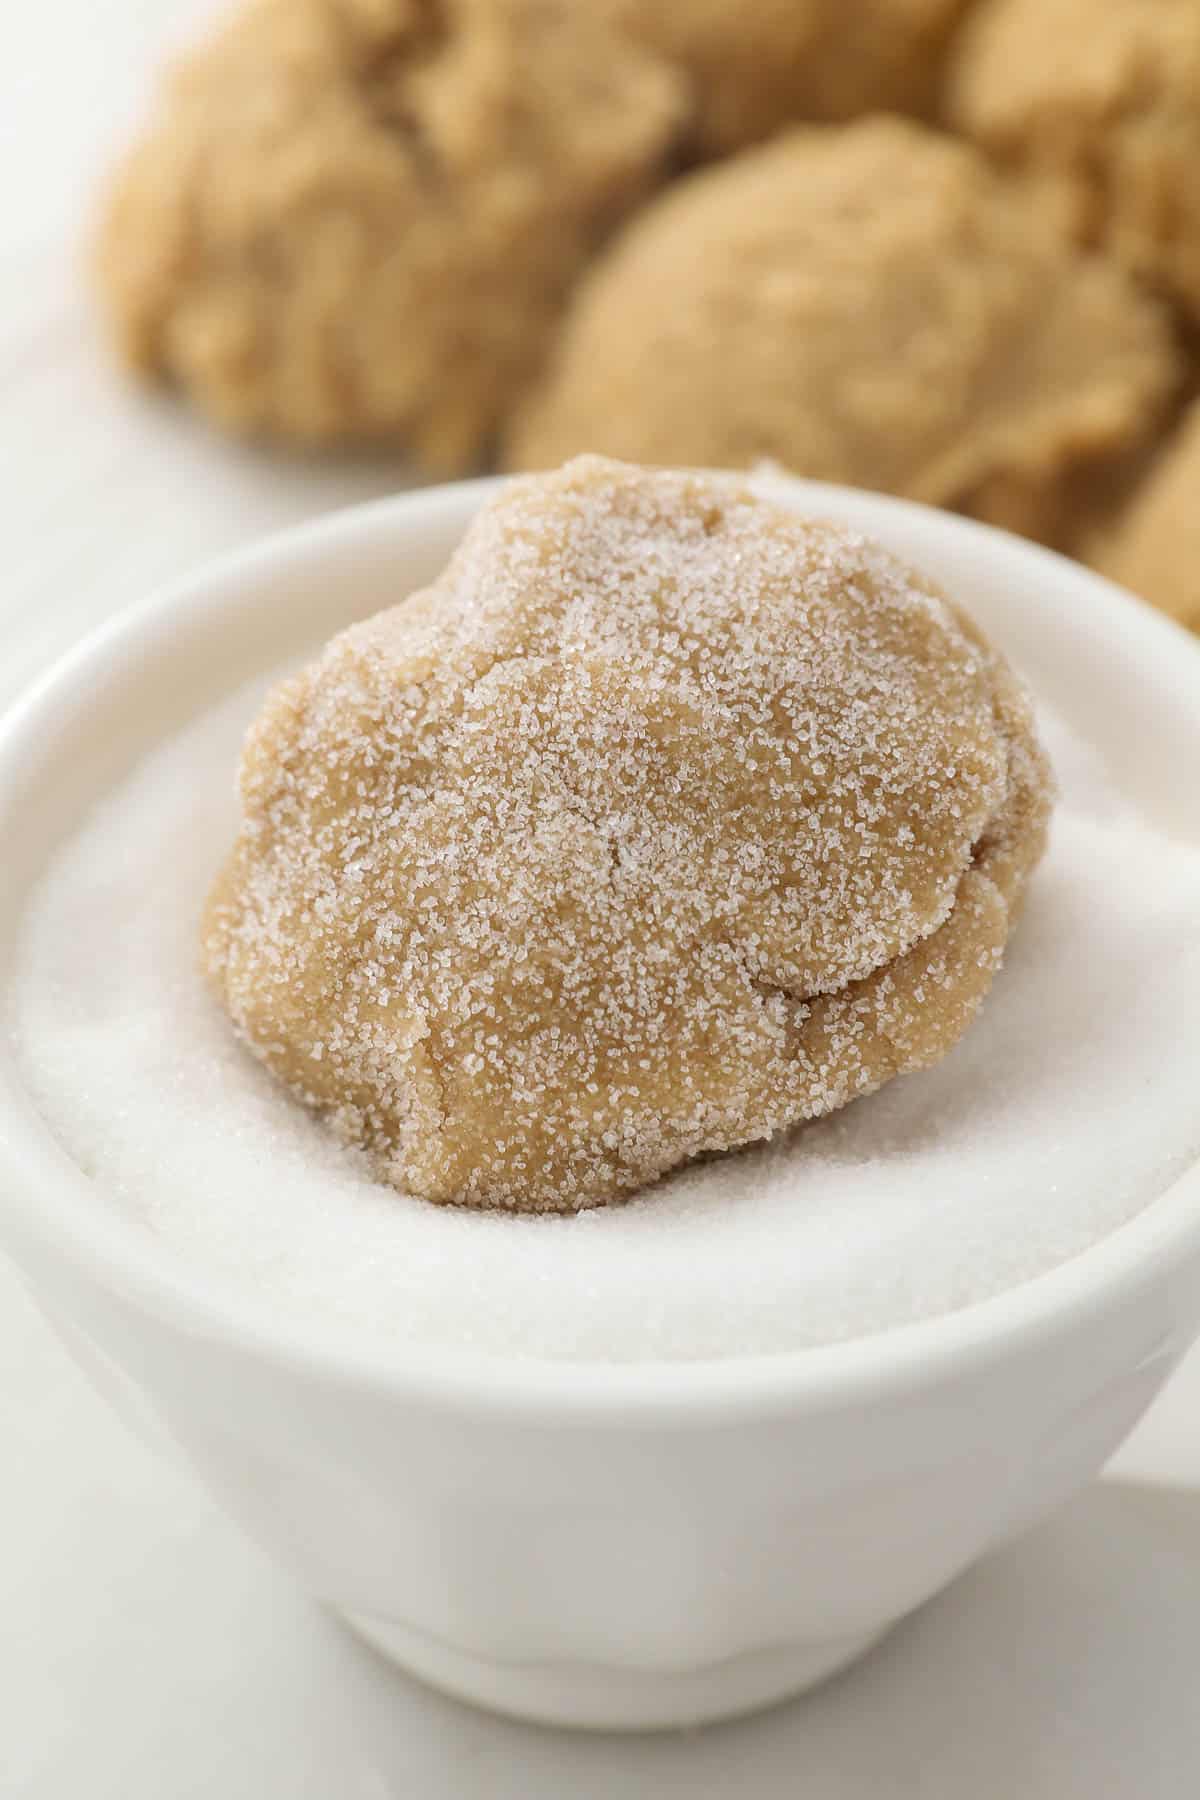 a ball of sugar cookie dough being rolled in a bowl of granulated sugar.